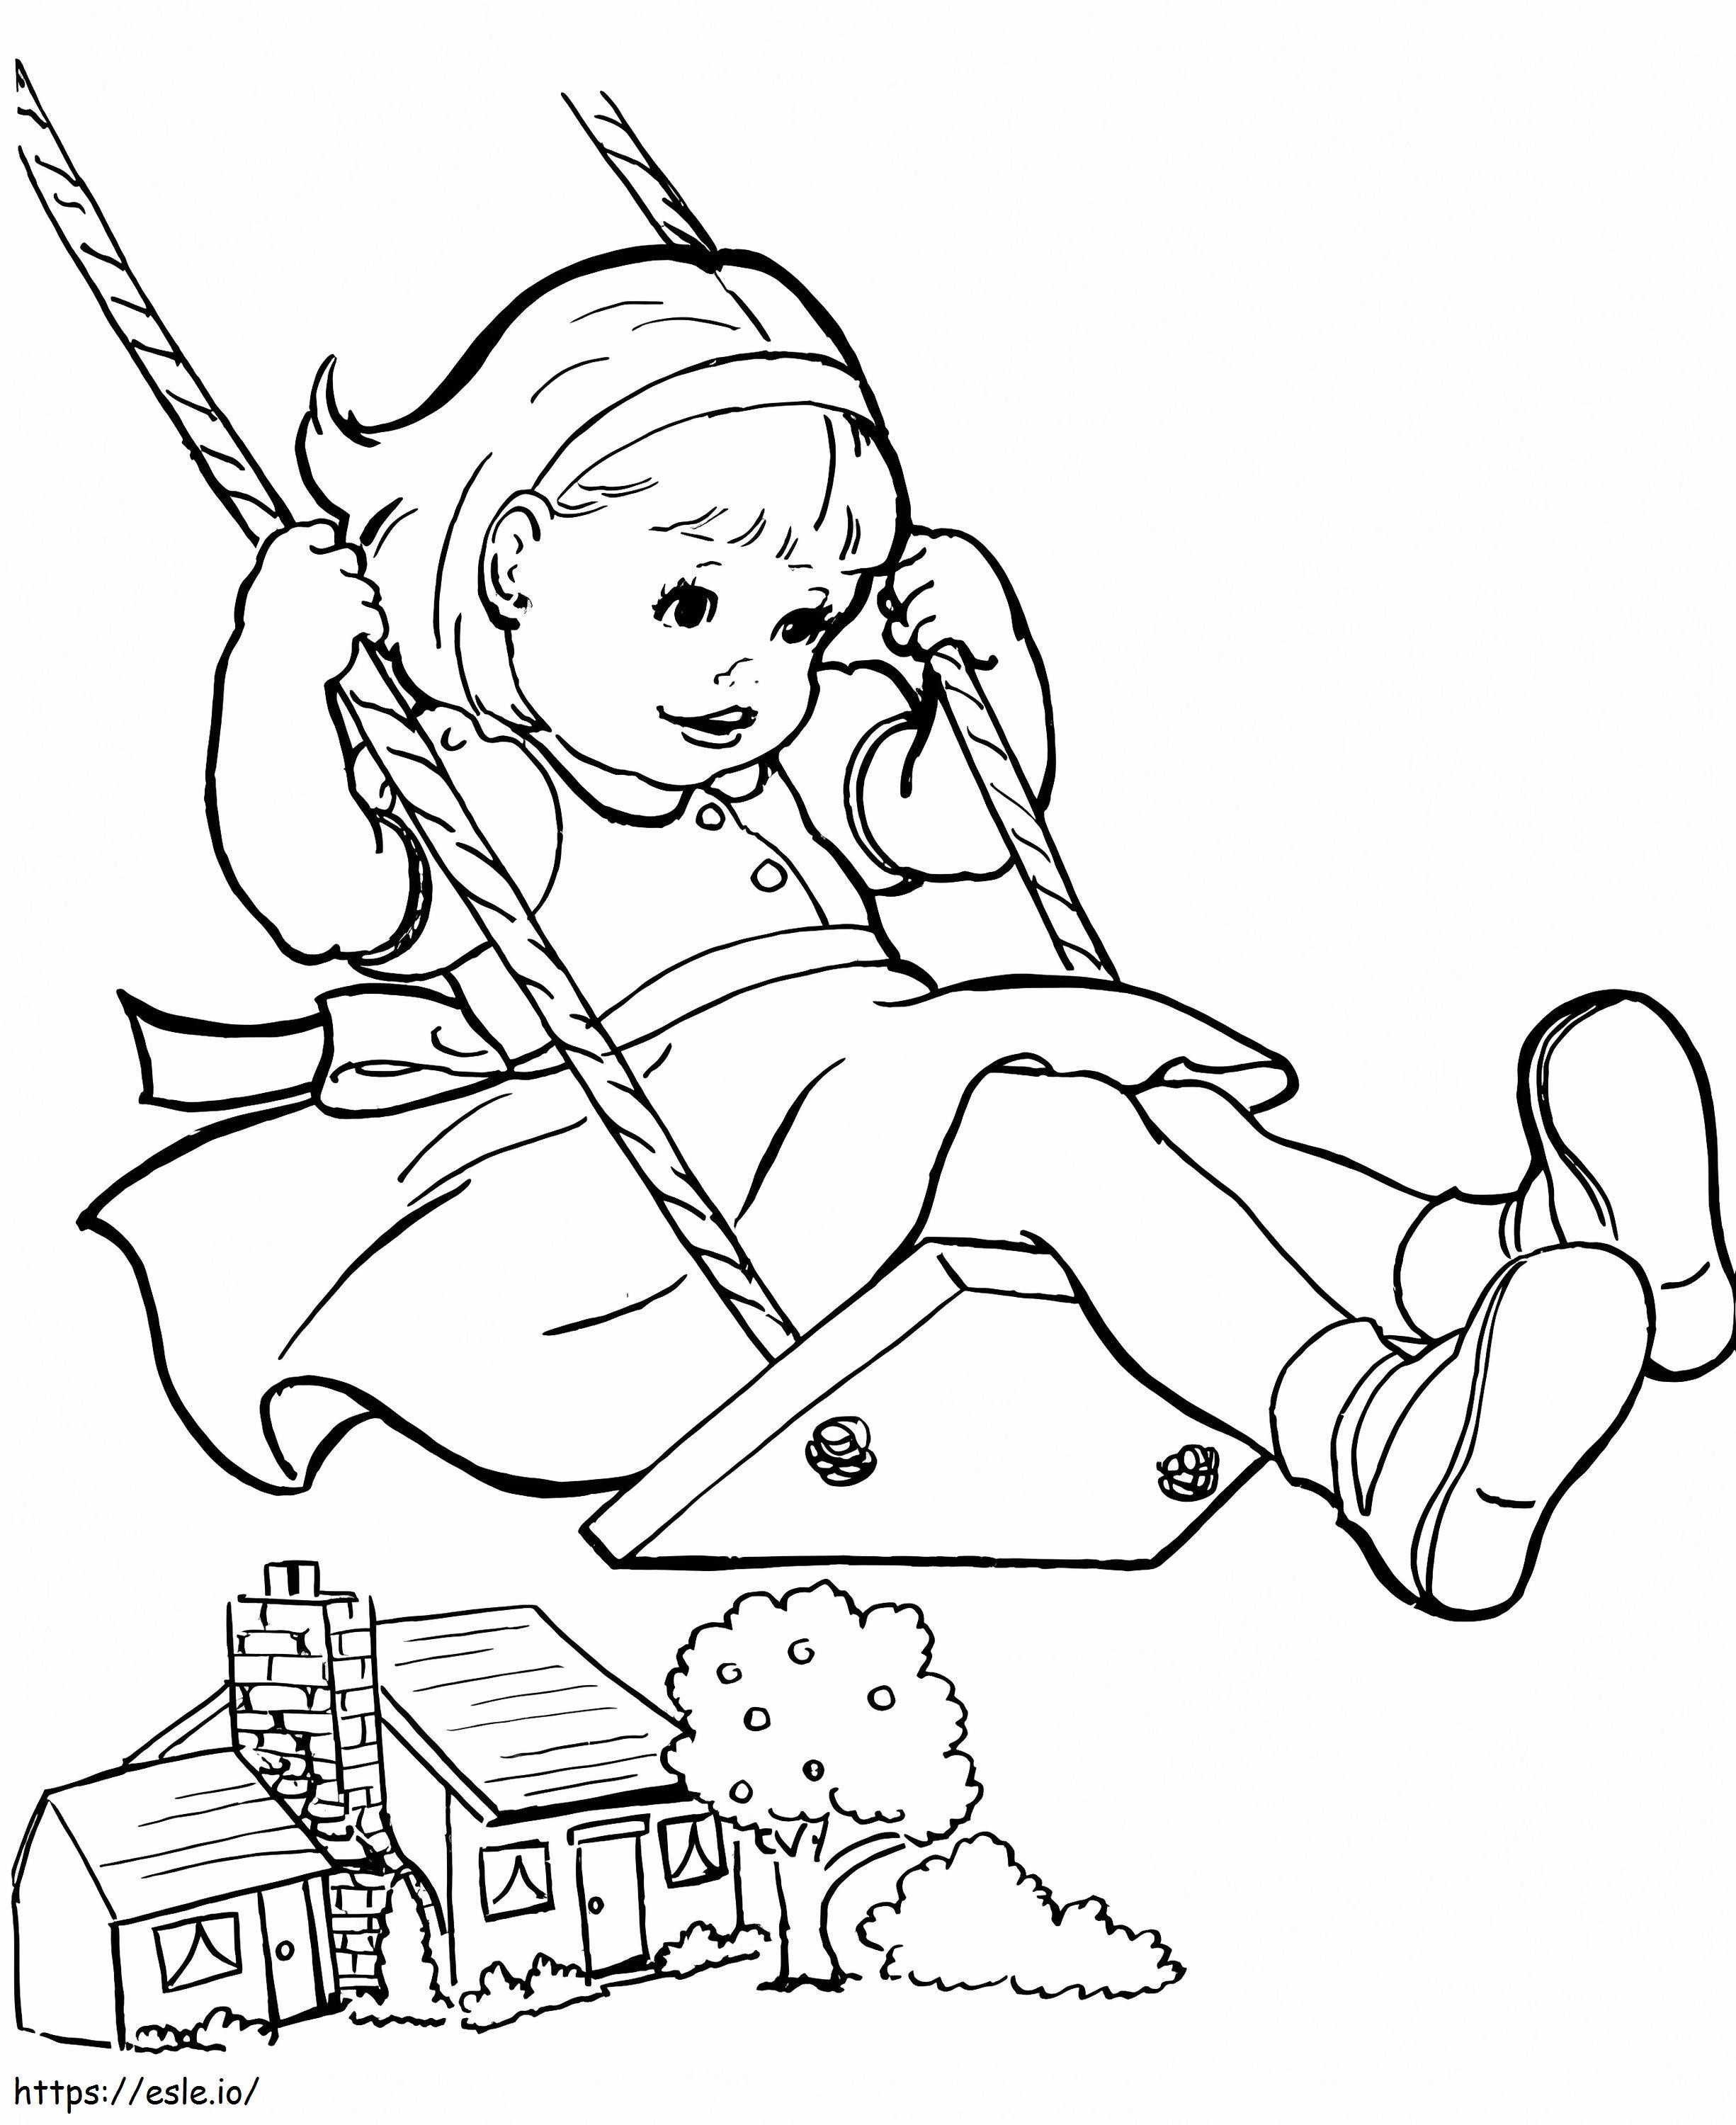 Swing To Color coloring page